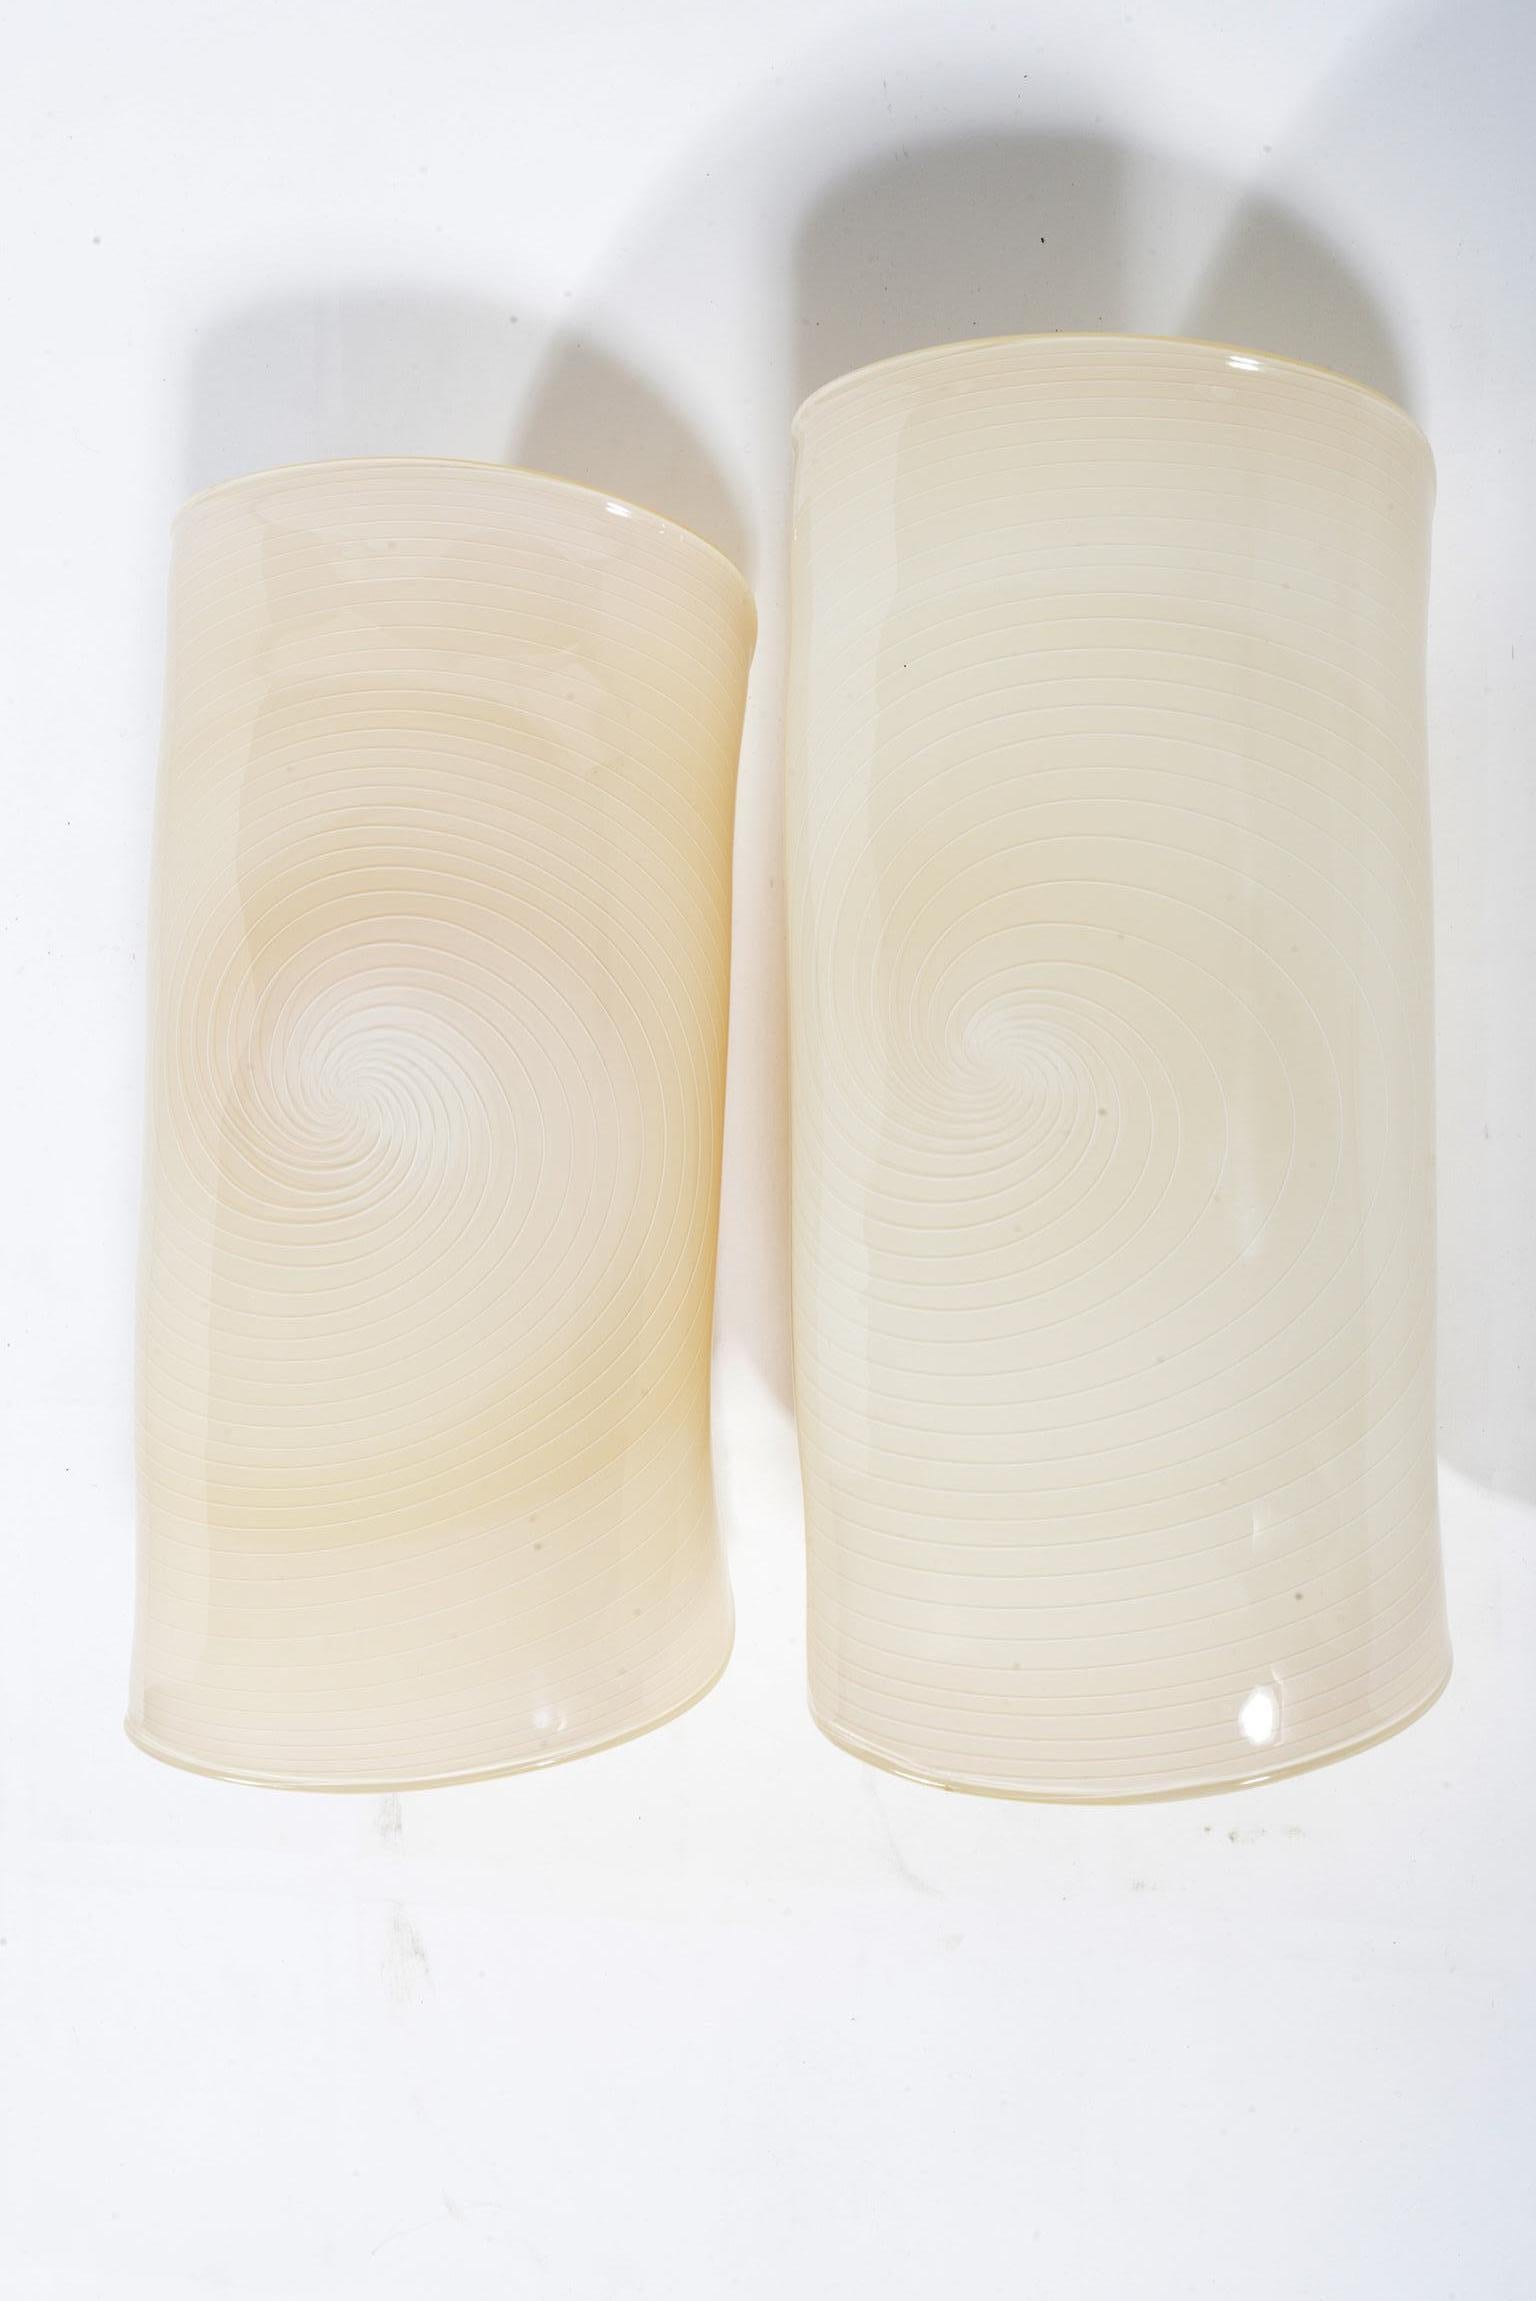 Pair of appliqués produced by La Murrina Murano Manufacture in the 1970s by blowing a disc in beige glass with a spiral of white glass, the disc was then folded when still hot to create the appliqué. The glass when it lights up reveals the light